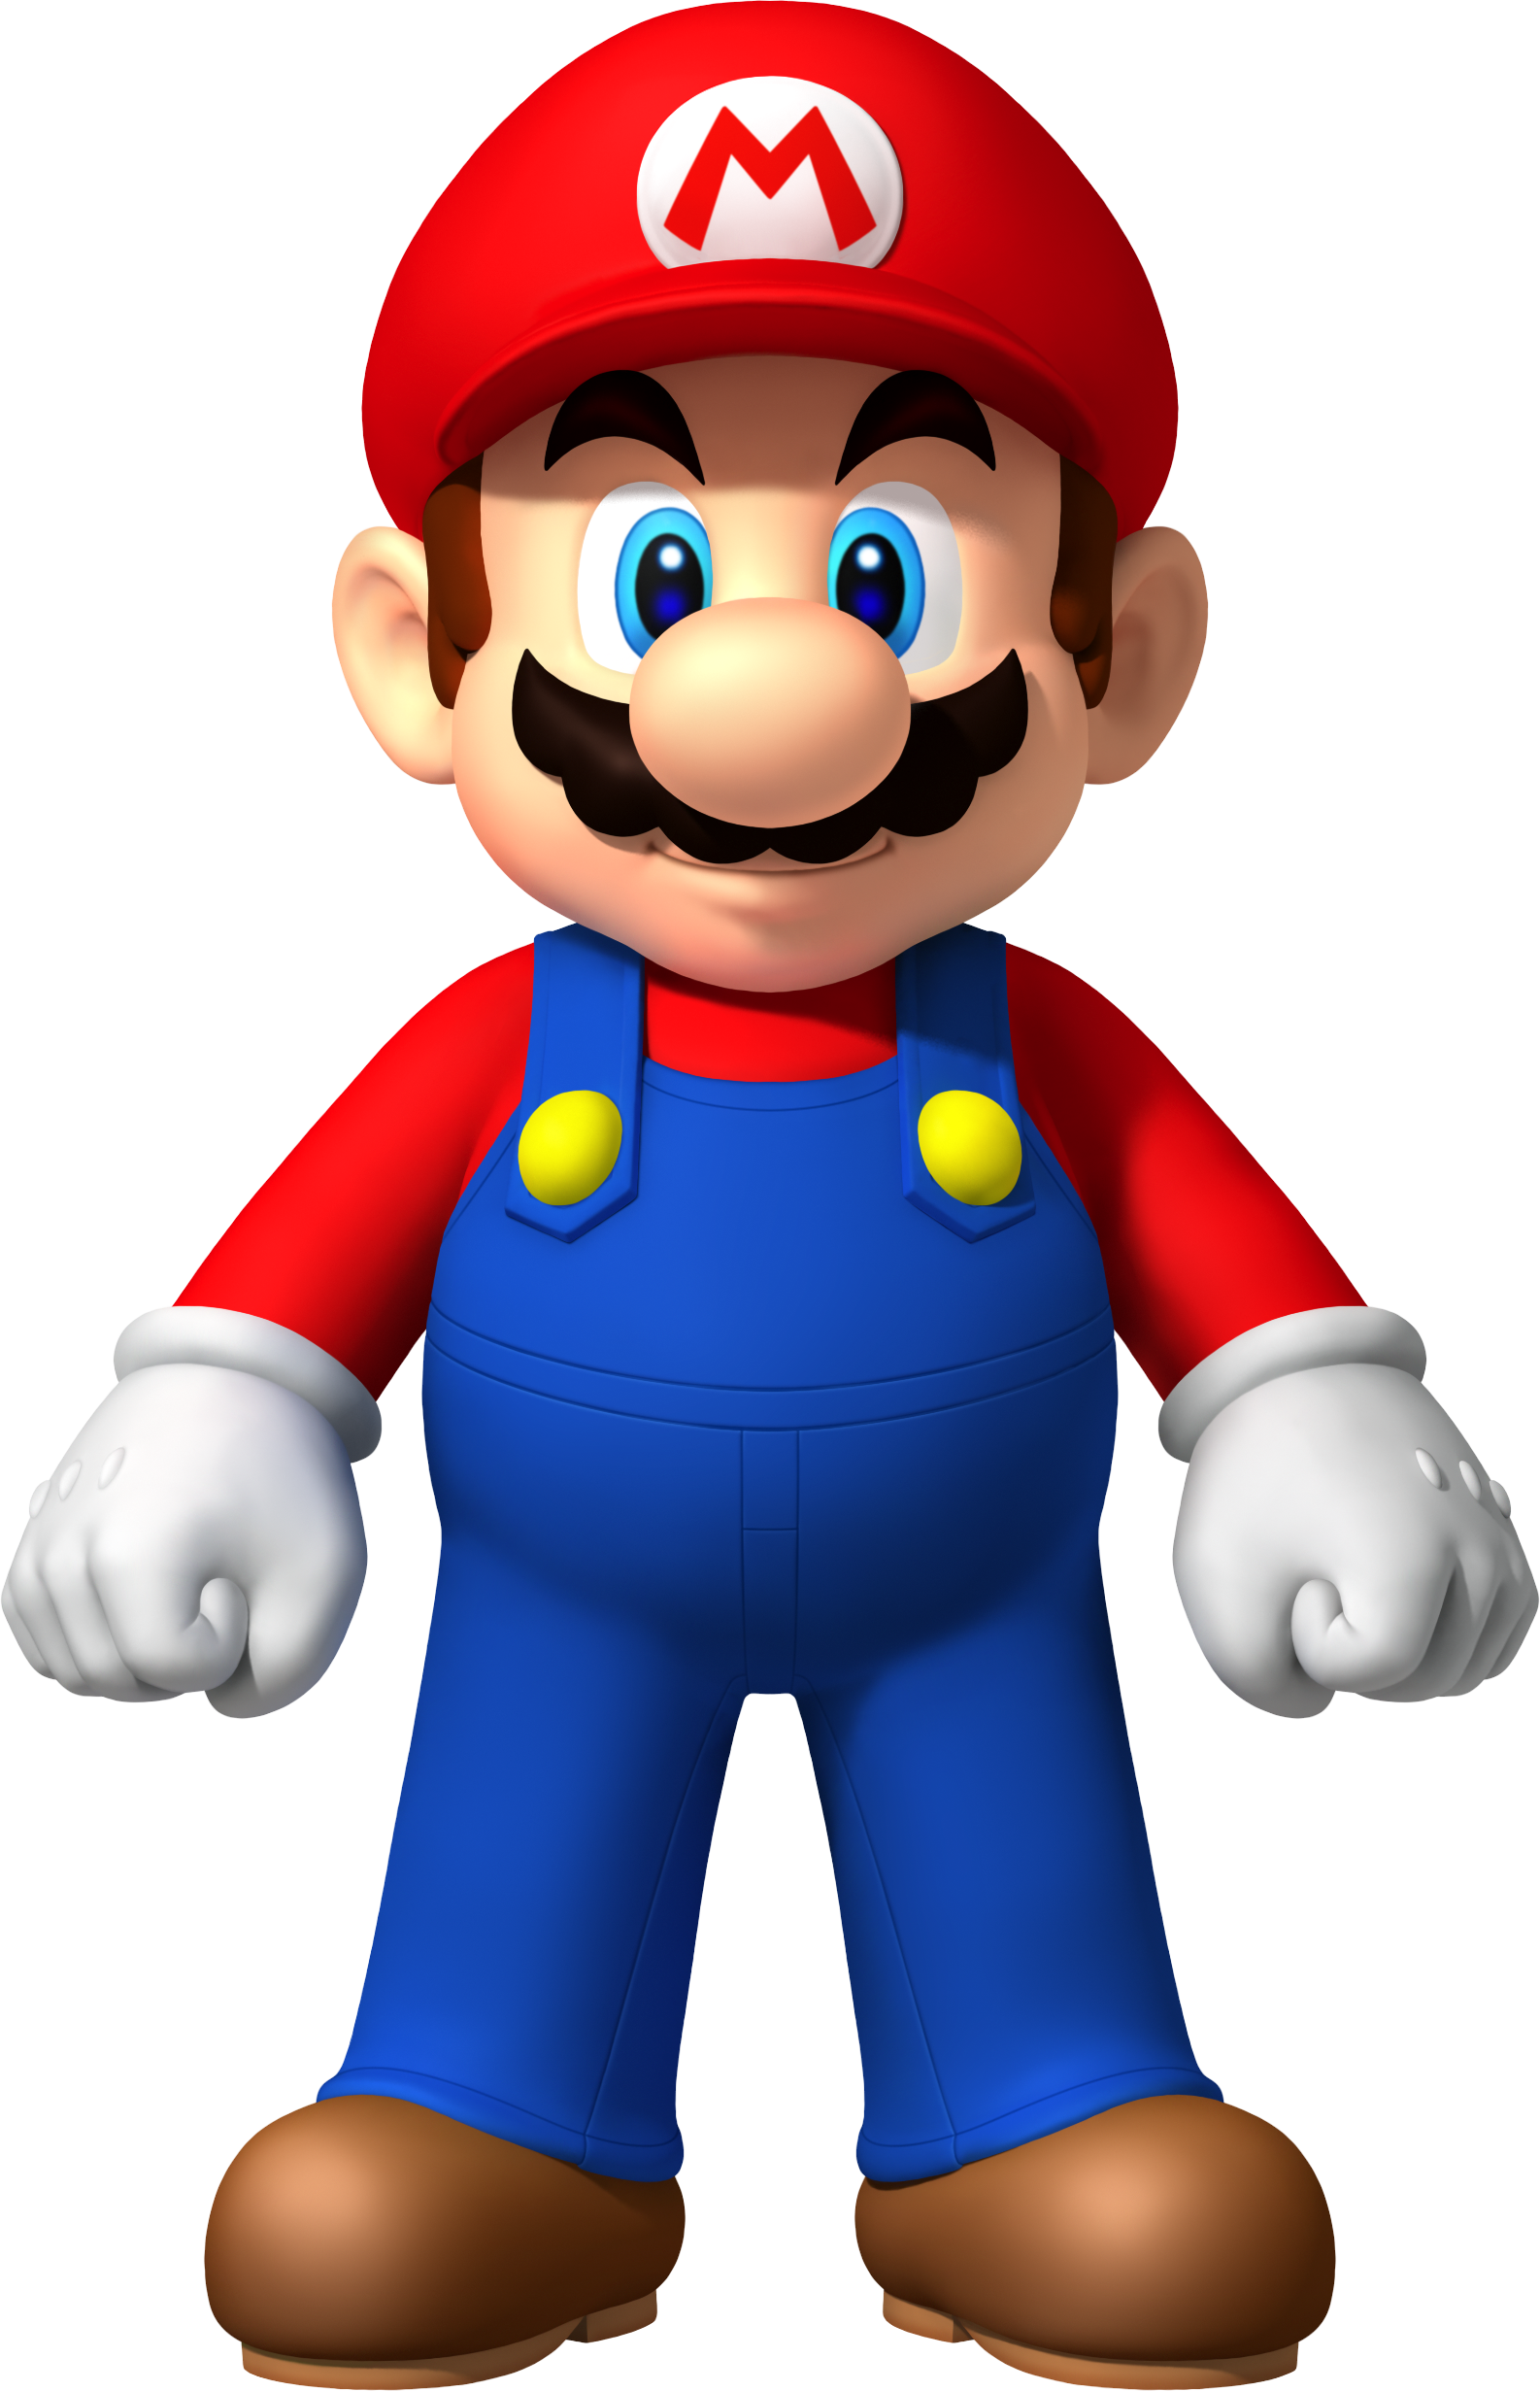 how many world are in super mario bros u